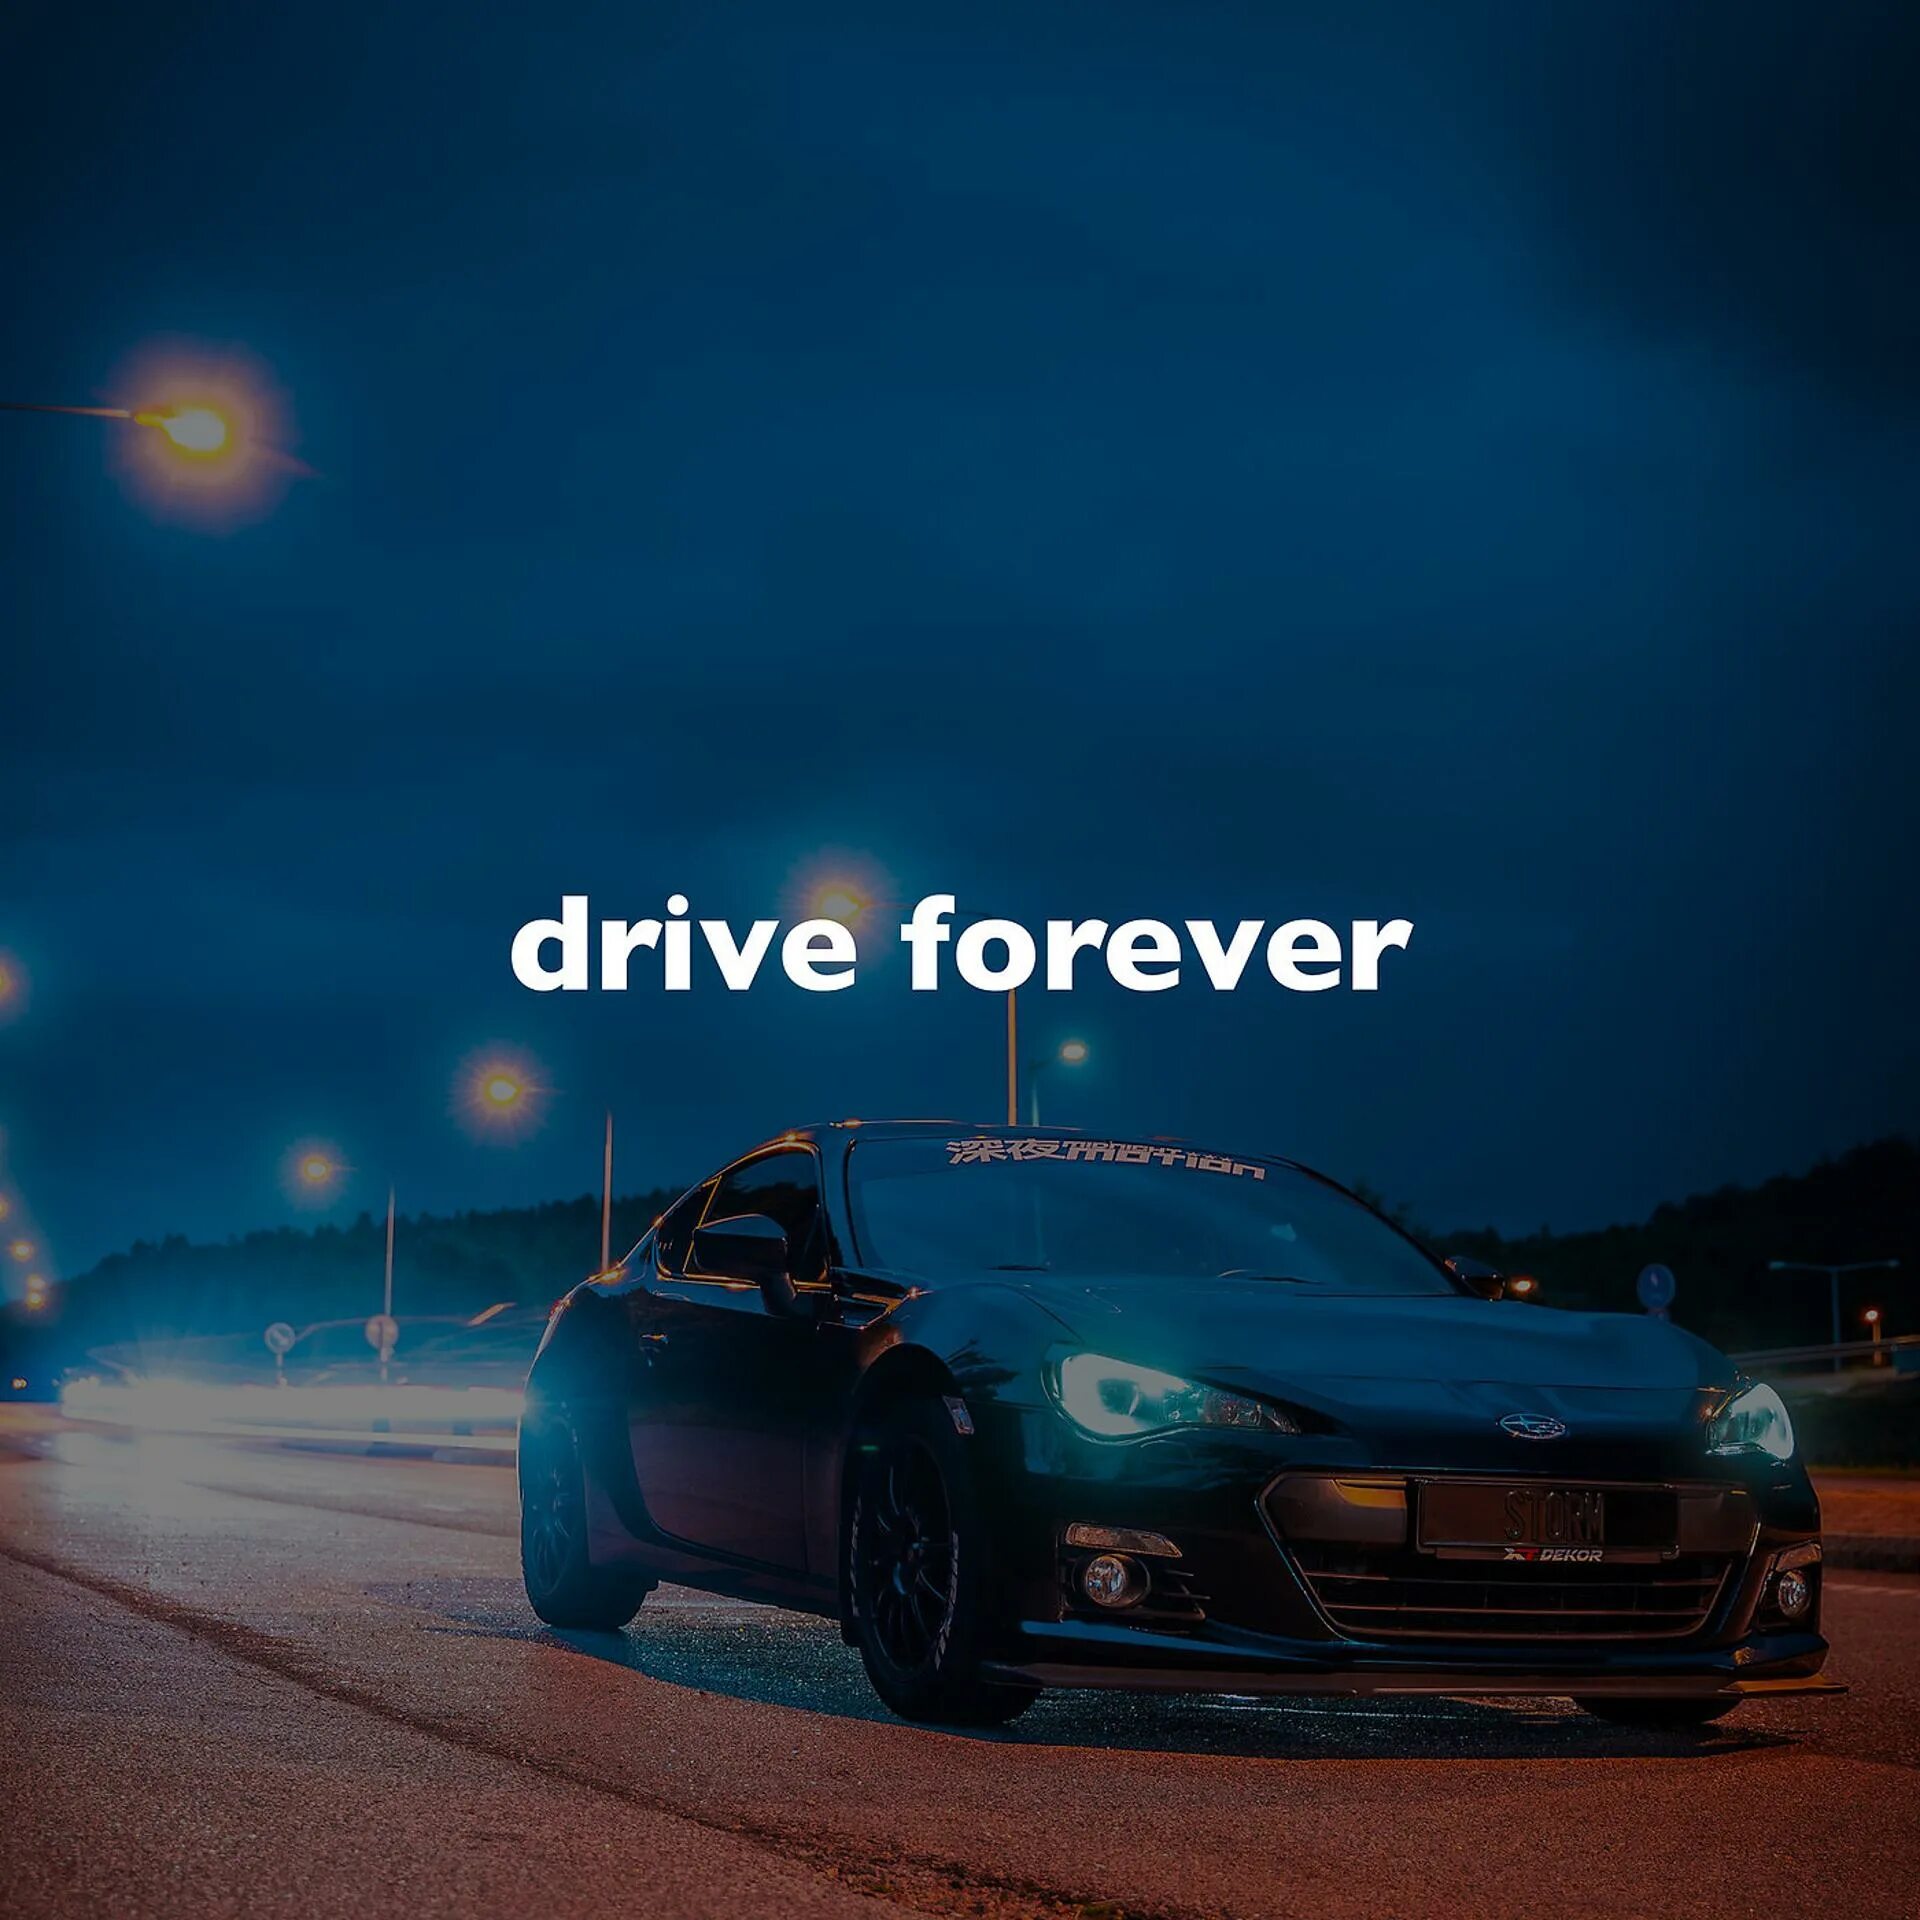 Drive Forever. Drive Forever Forever. Drive Forever Remix. Drive Forever Slowed.